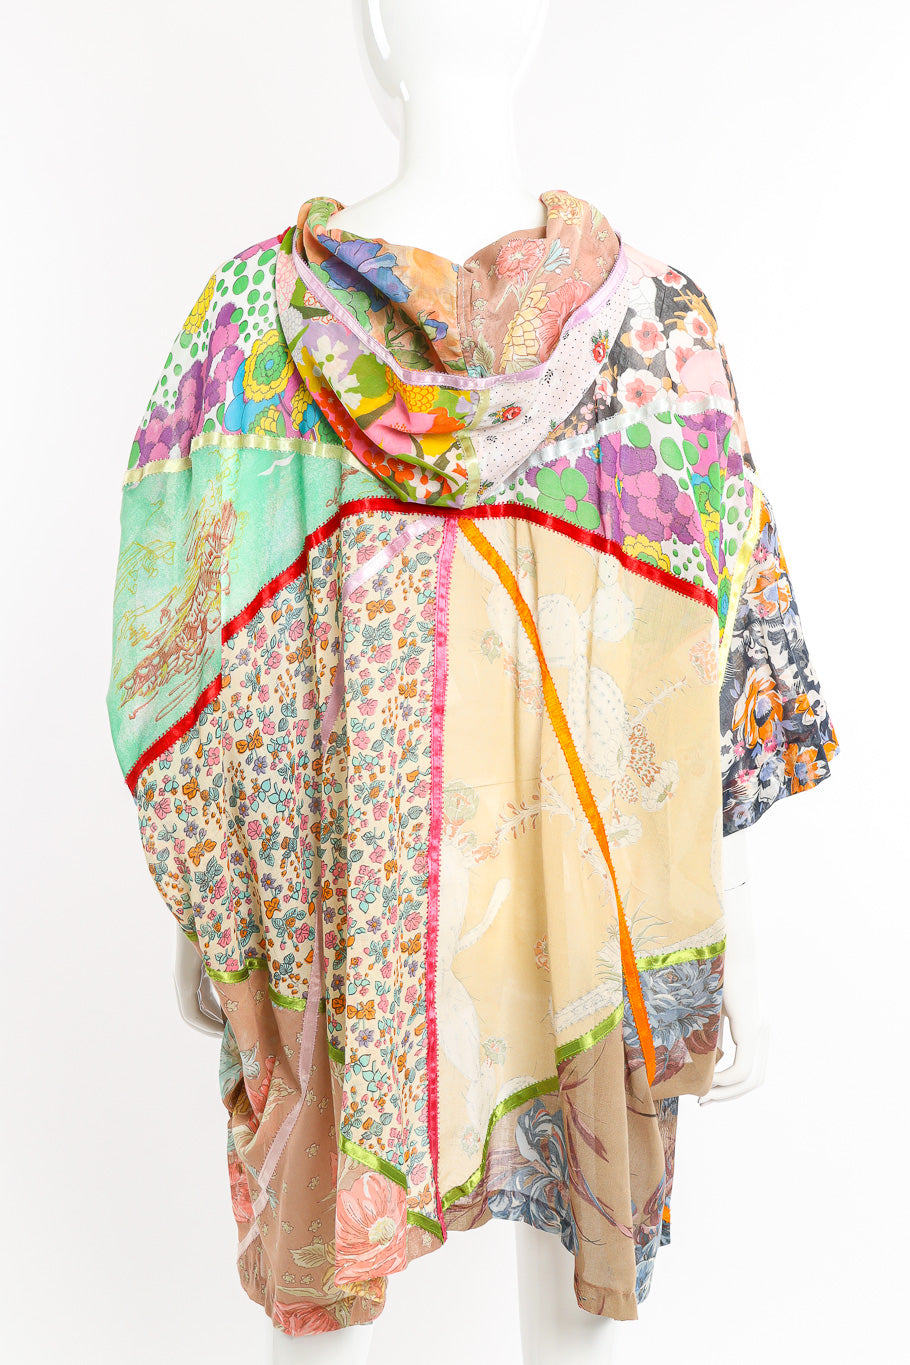 Vintage The French Clique Hooded Floral Patchwork Poncho II back view on mannequin @Recessla